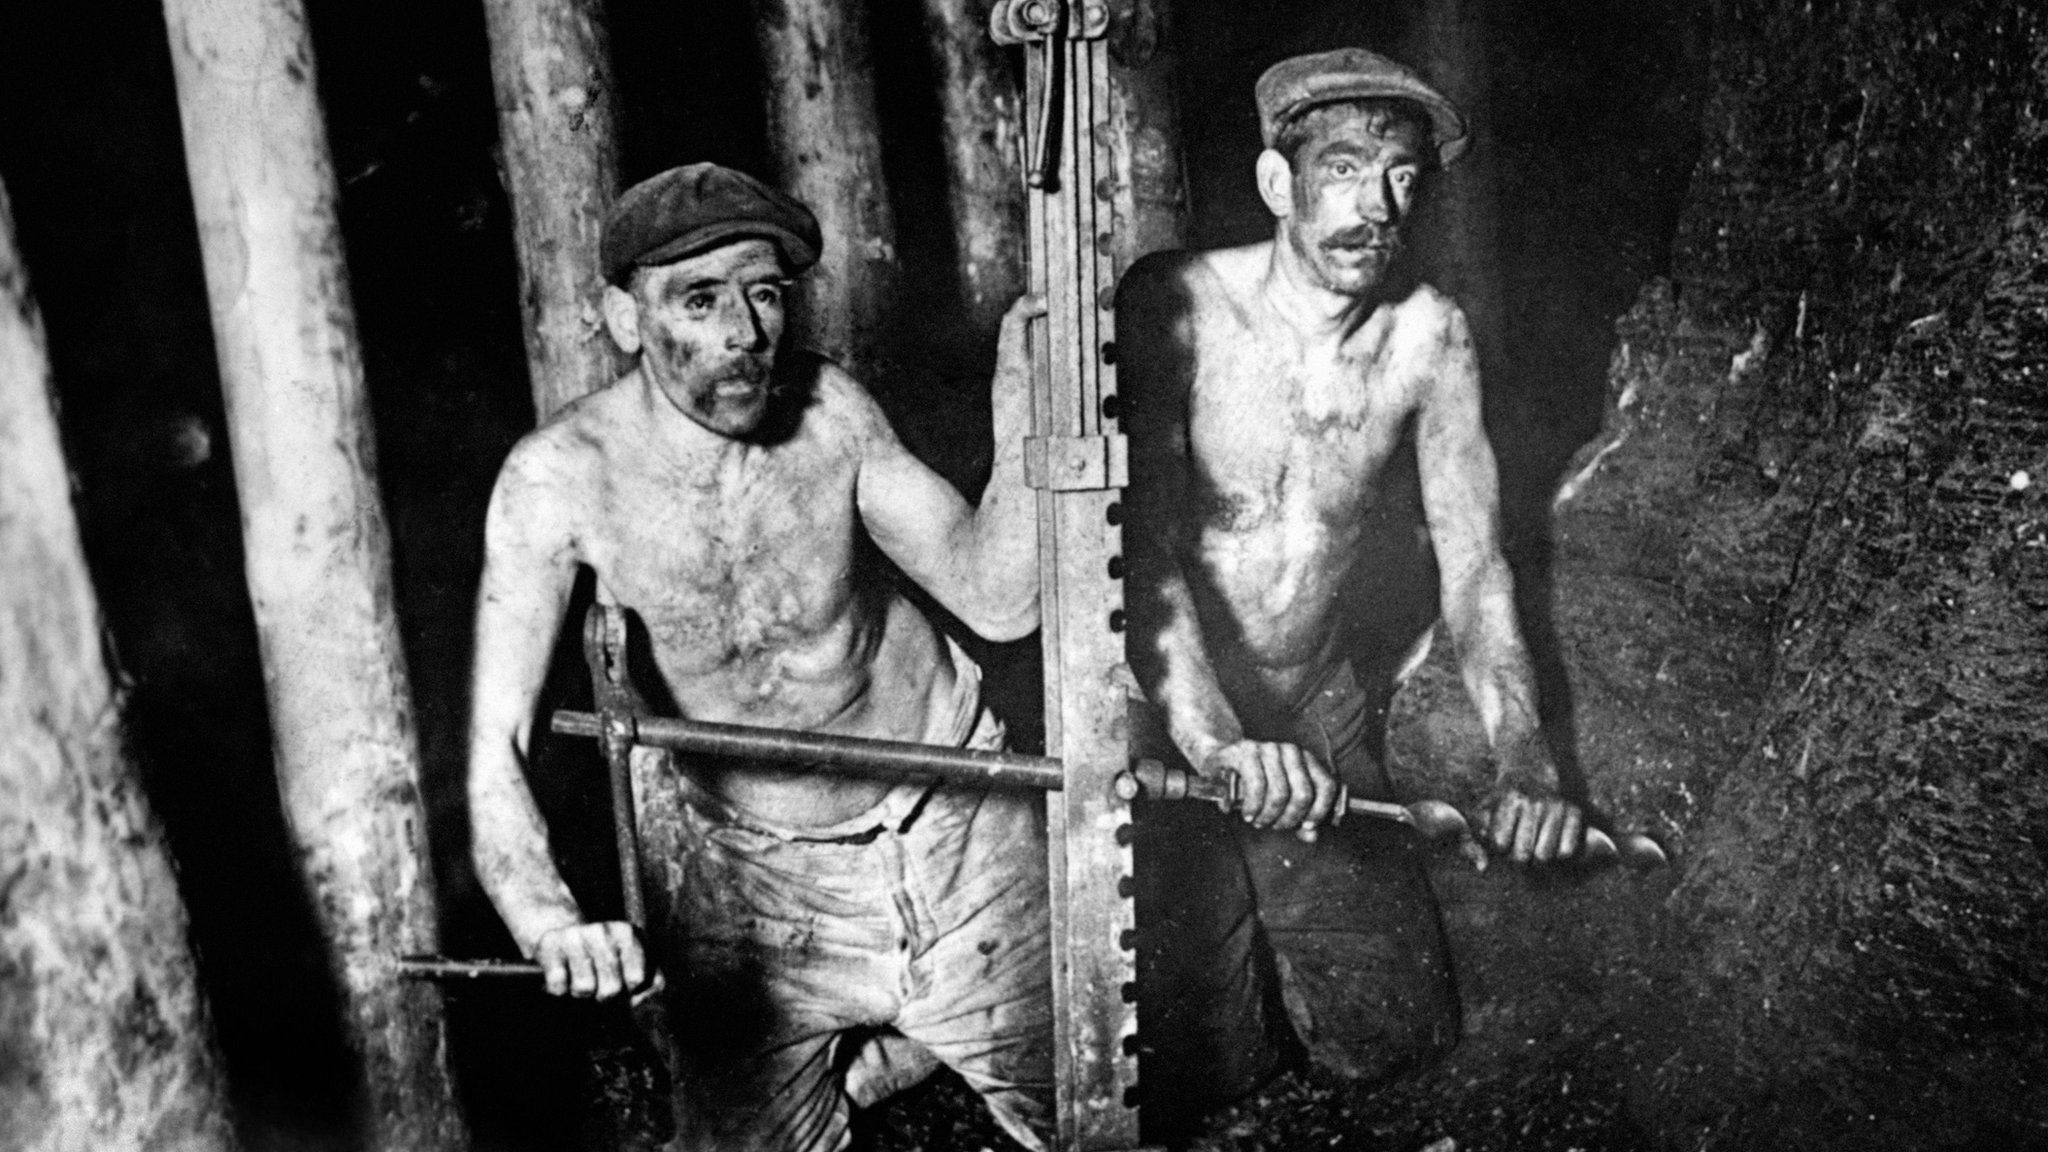 Two miners digging coal in 1924